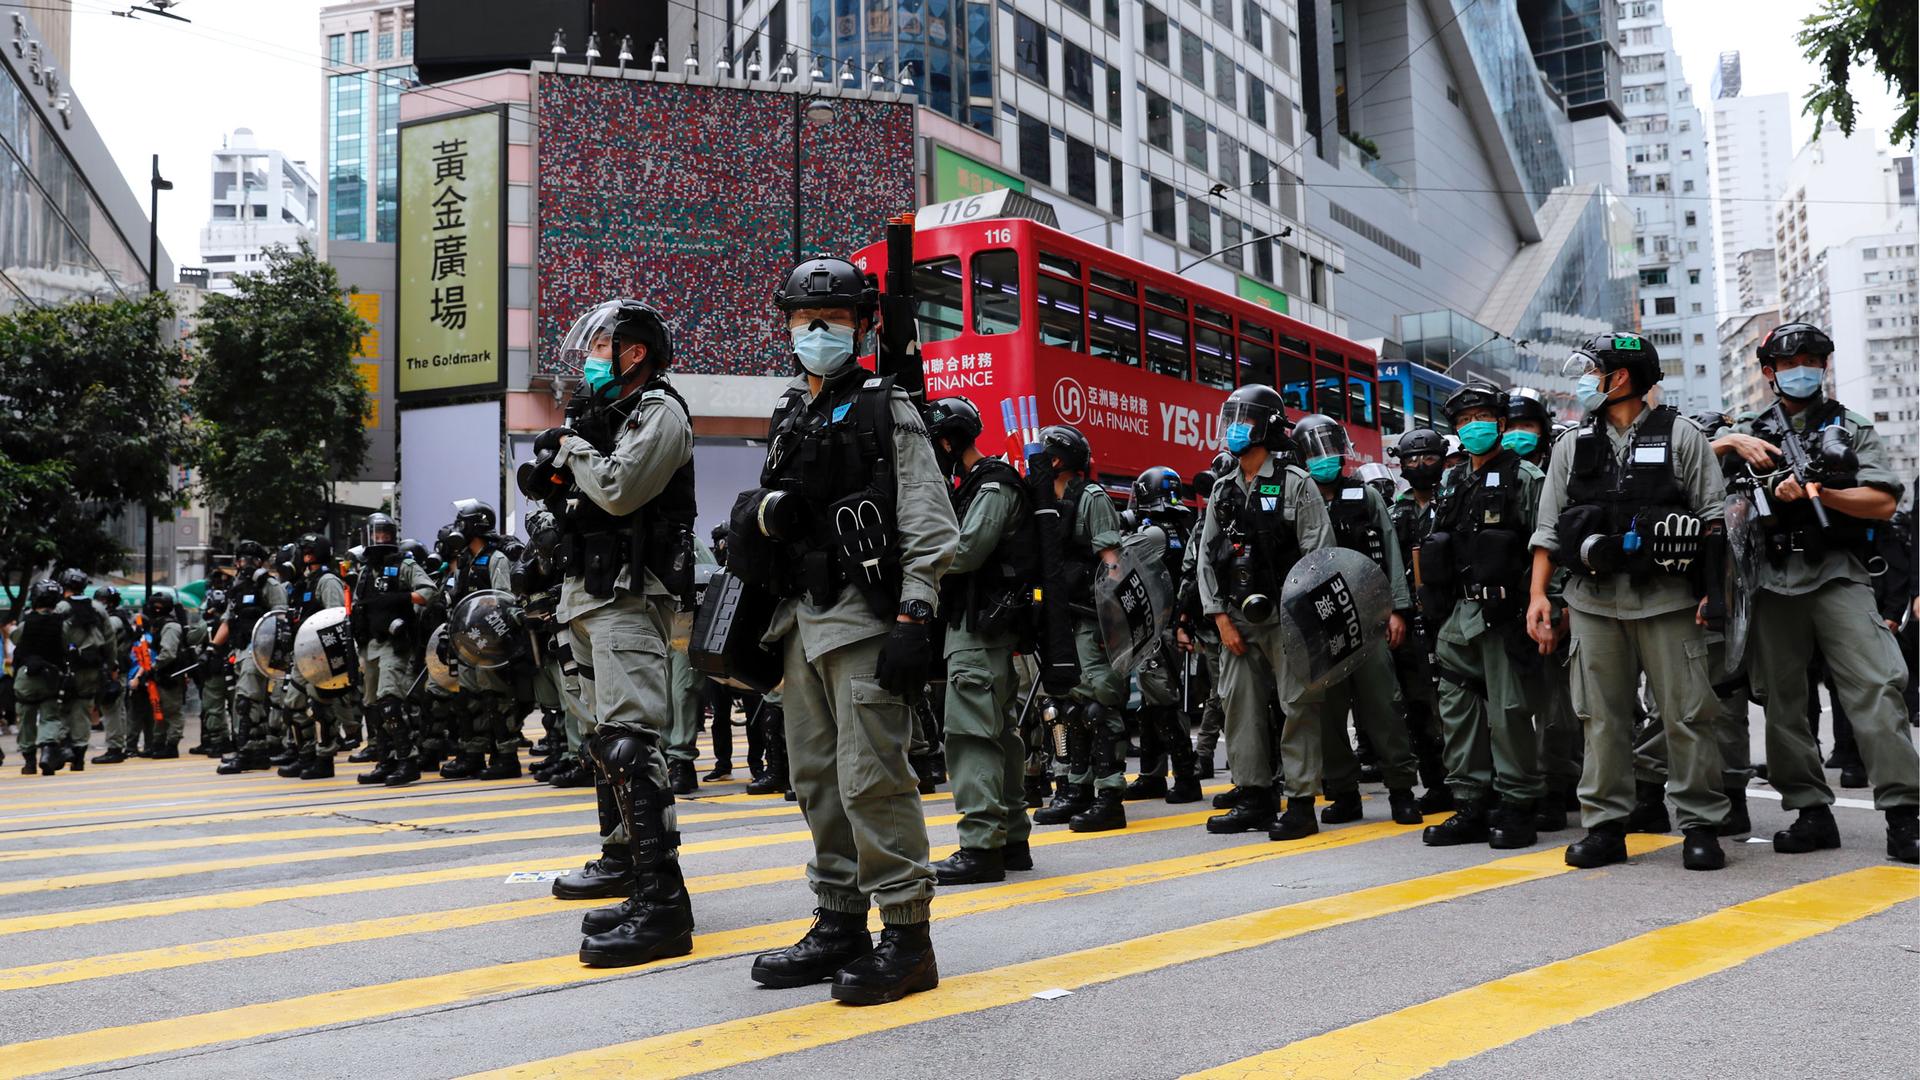 Riot police are shown standing in a line across the middle of a large street and wearing protective armor in Hong Kong.